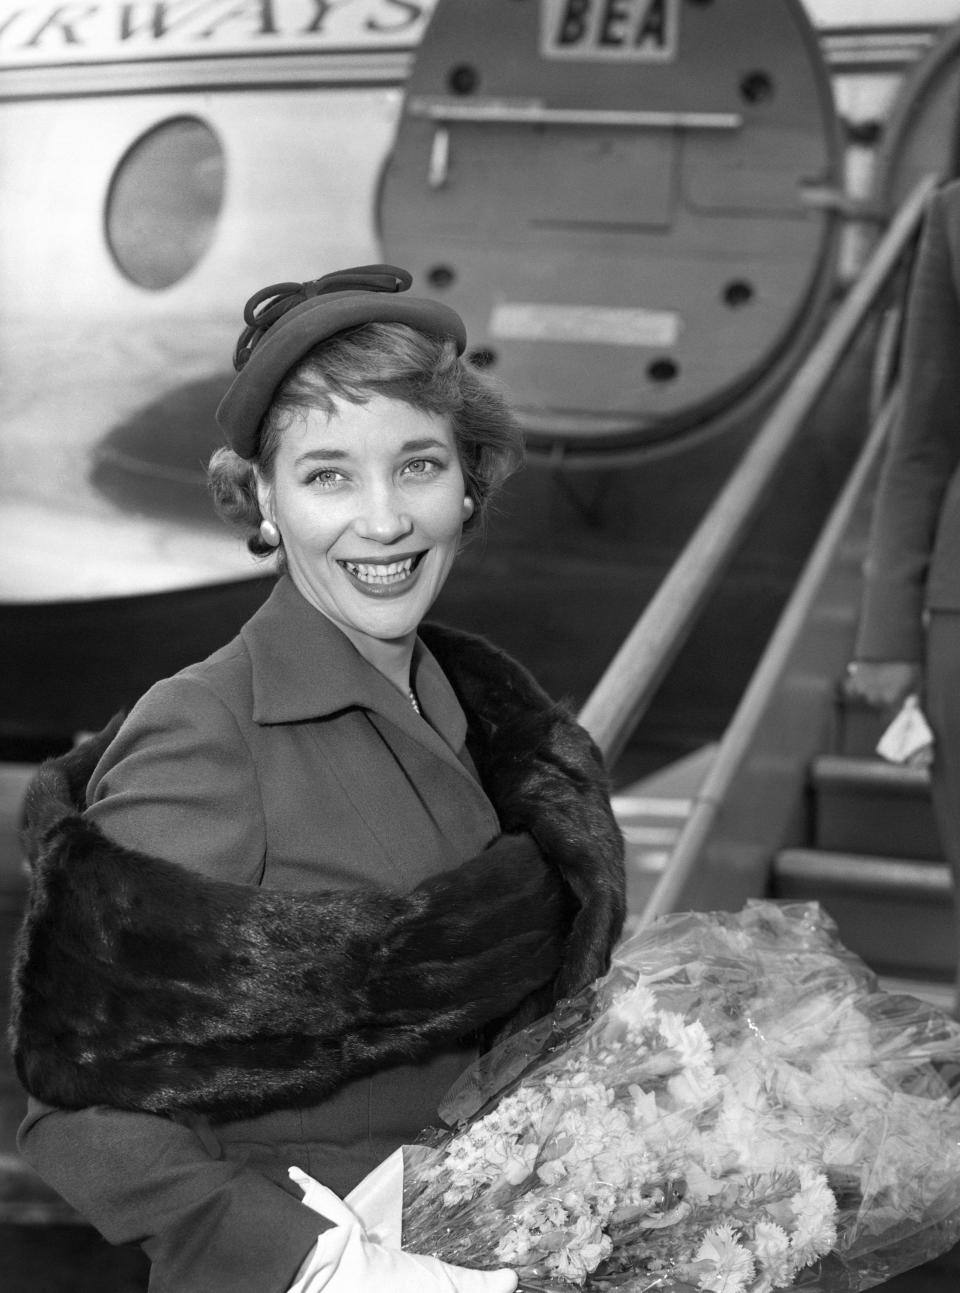 In this file photo dated July 1, 1957, Sylvia Syms prepares to leave London Airport for Berlin to attend the Film Festival, in which her picture 'Woman in a Dressing Gown' is being shown as the official British entry. Actress Sylvia Syms, who starred in classic British films including “Ice Cold in Alex” and “Victim,” has died, her family said Friday, Jan. 27, 2023. She was 89. (PA via AP)